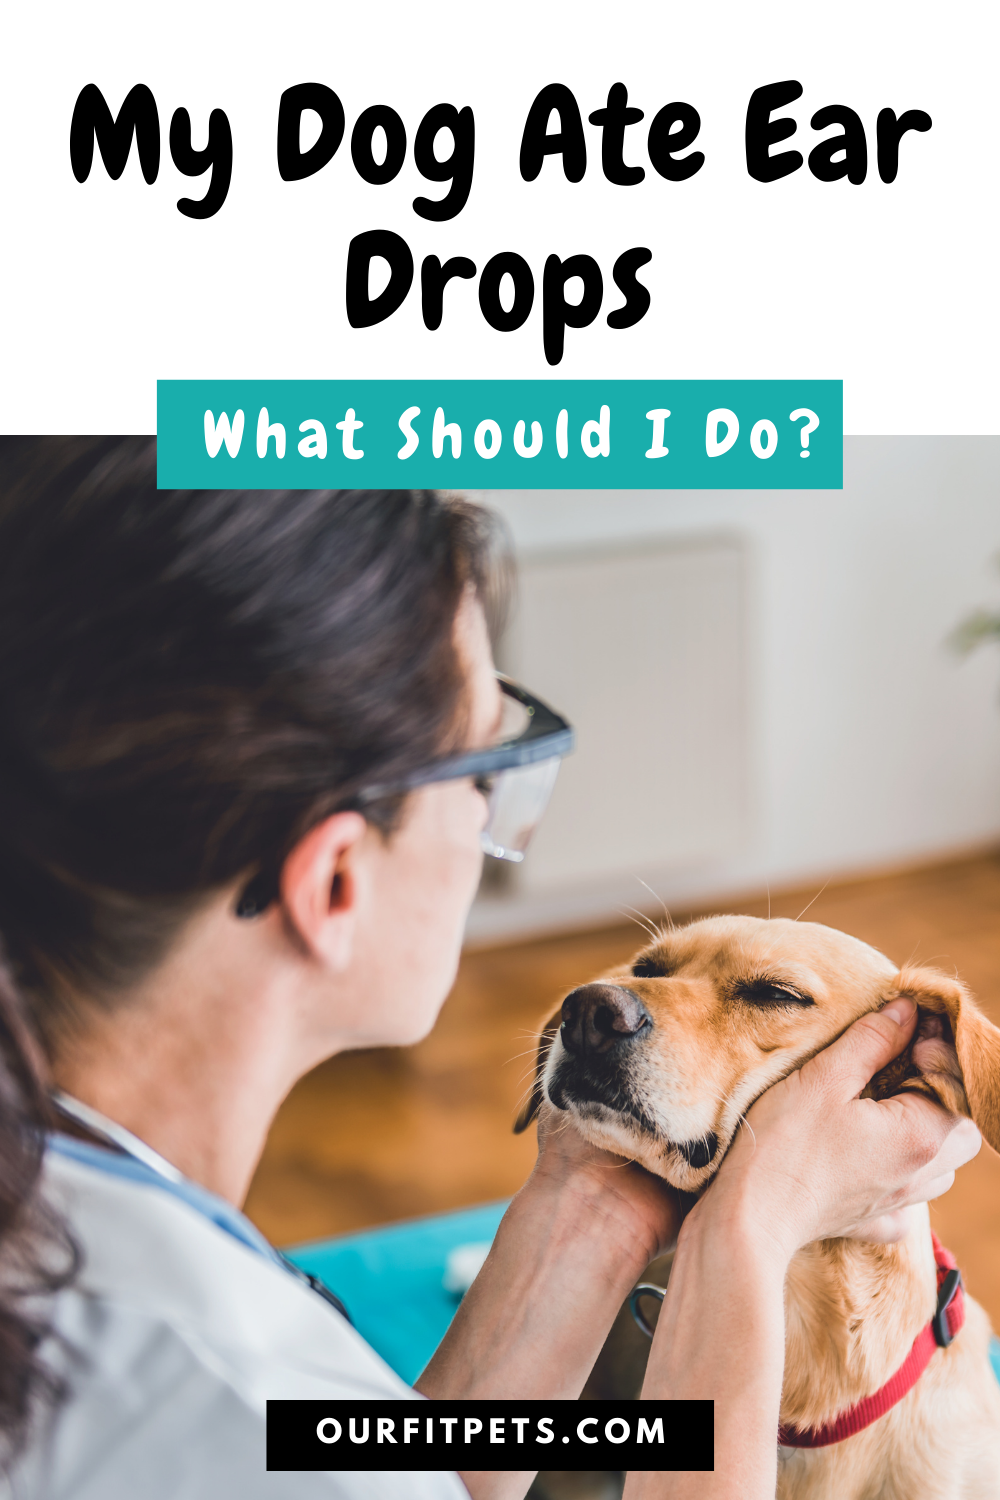 My Dog Ate Ear Drops What Should I Do?